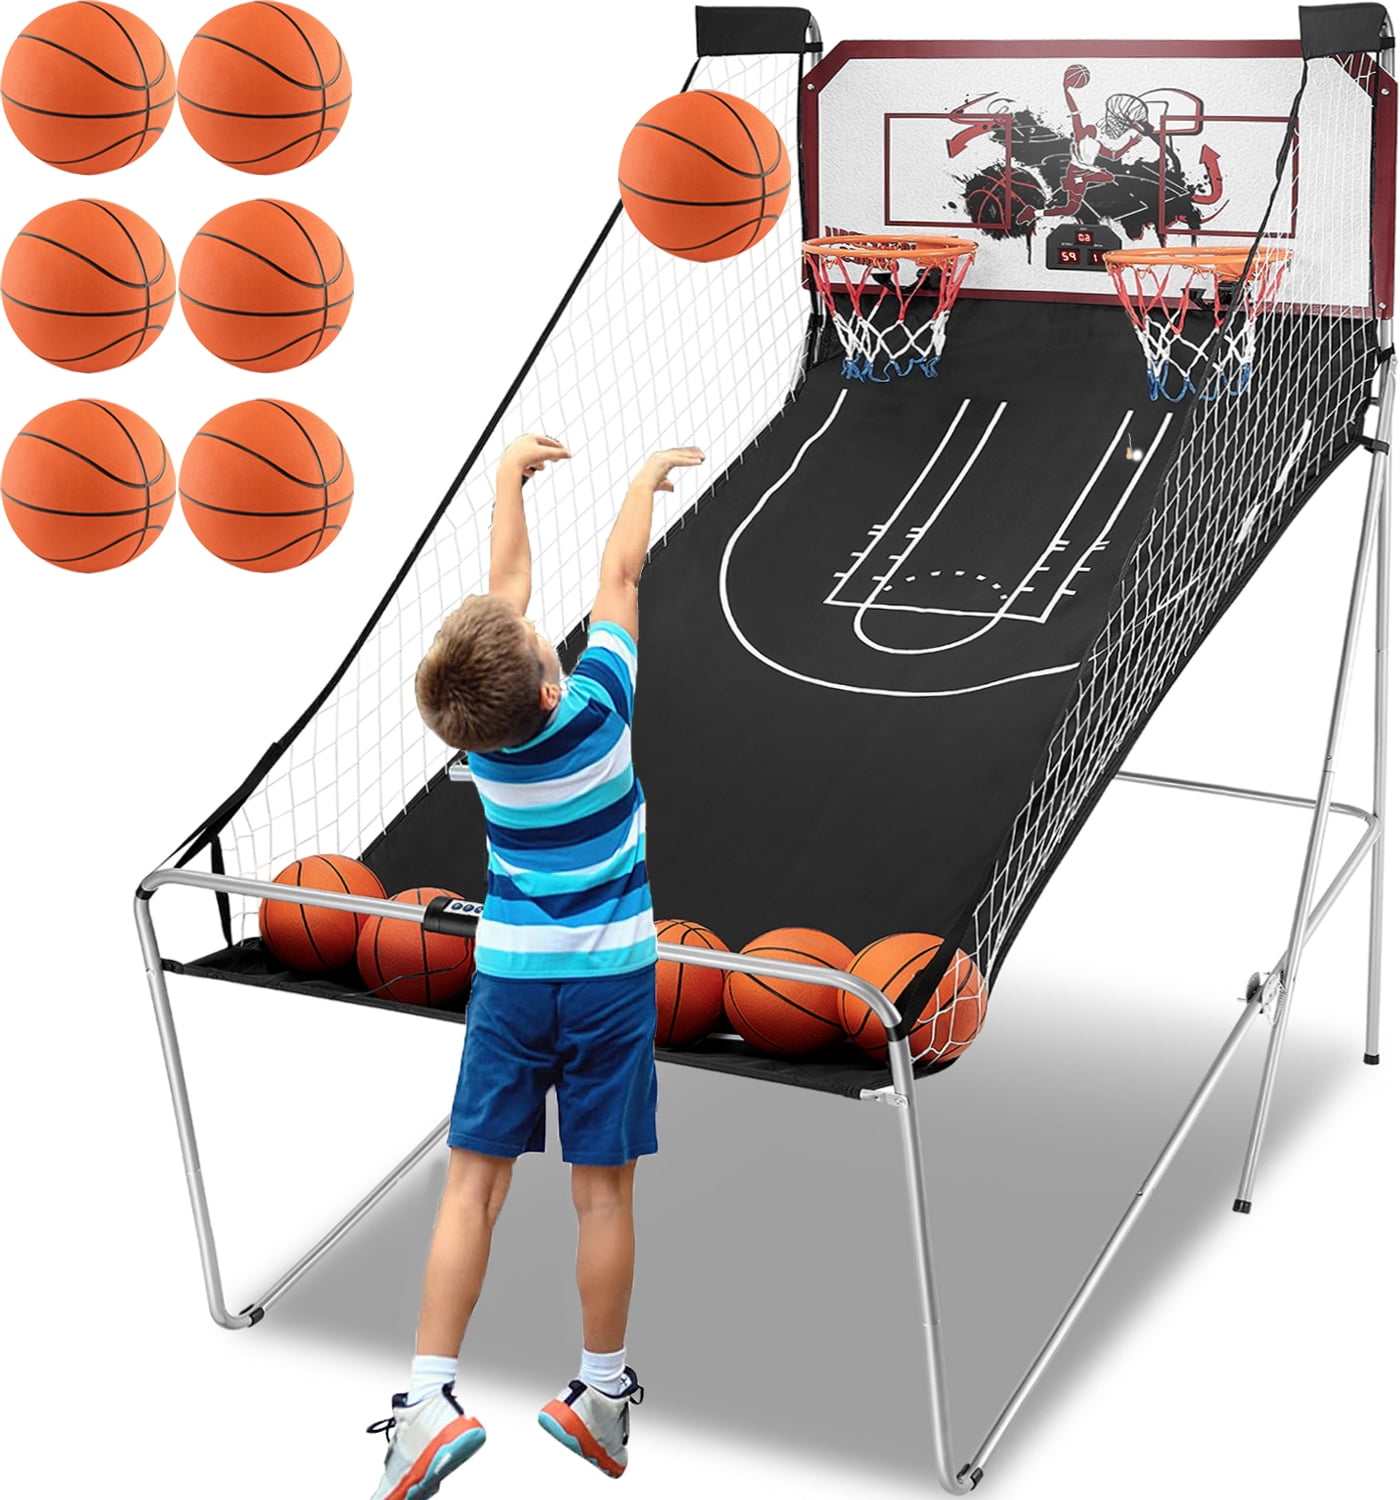 MD Sports EZ-Fold 2-Player 80.5 inch Arcade Basketball Game with